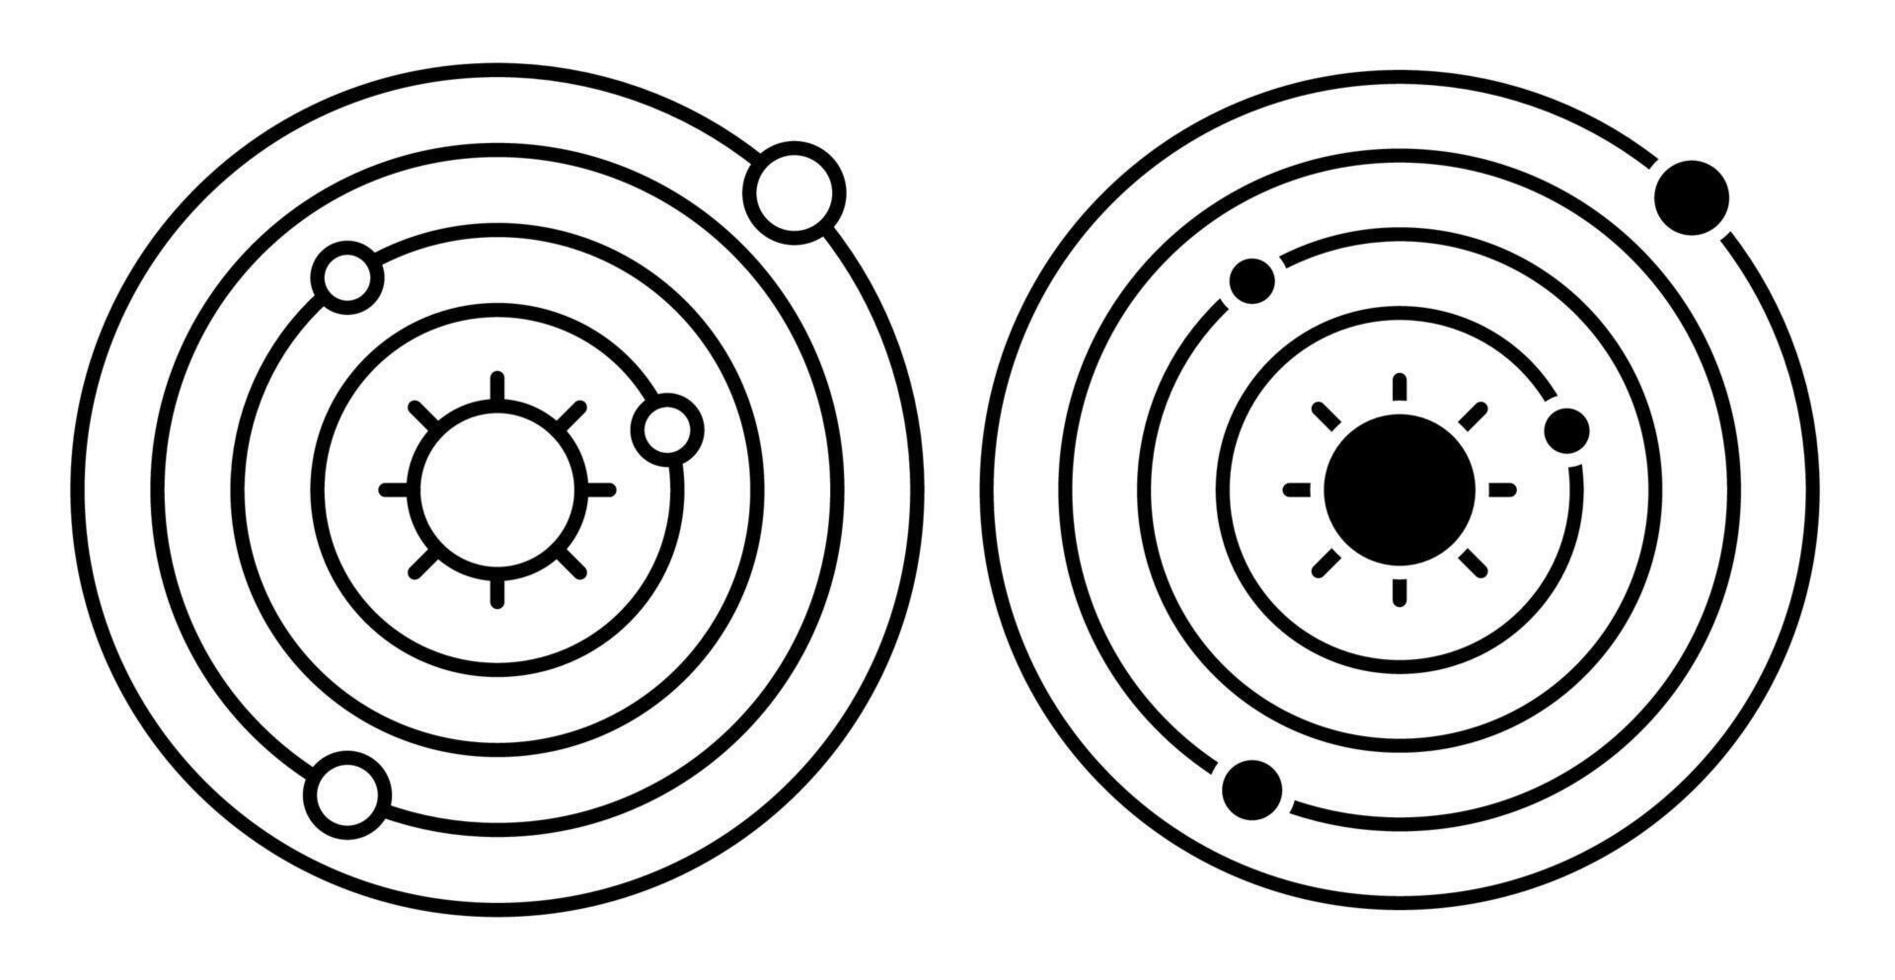 Linear icon. Abstract model of solar system. Planets revolve in orbits in space around star, sun. Simple black and white vector